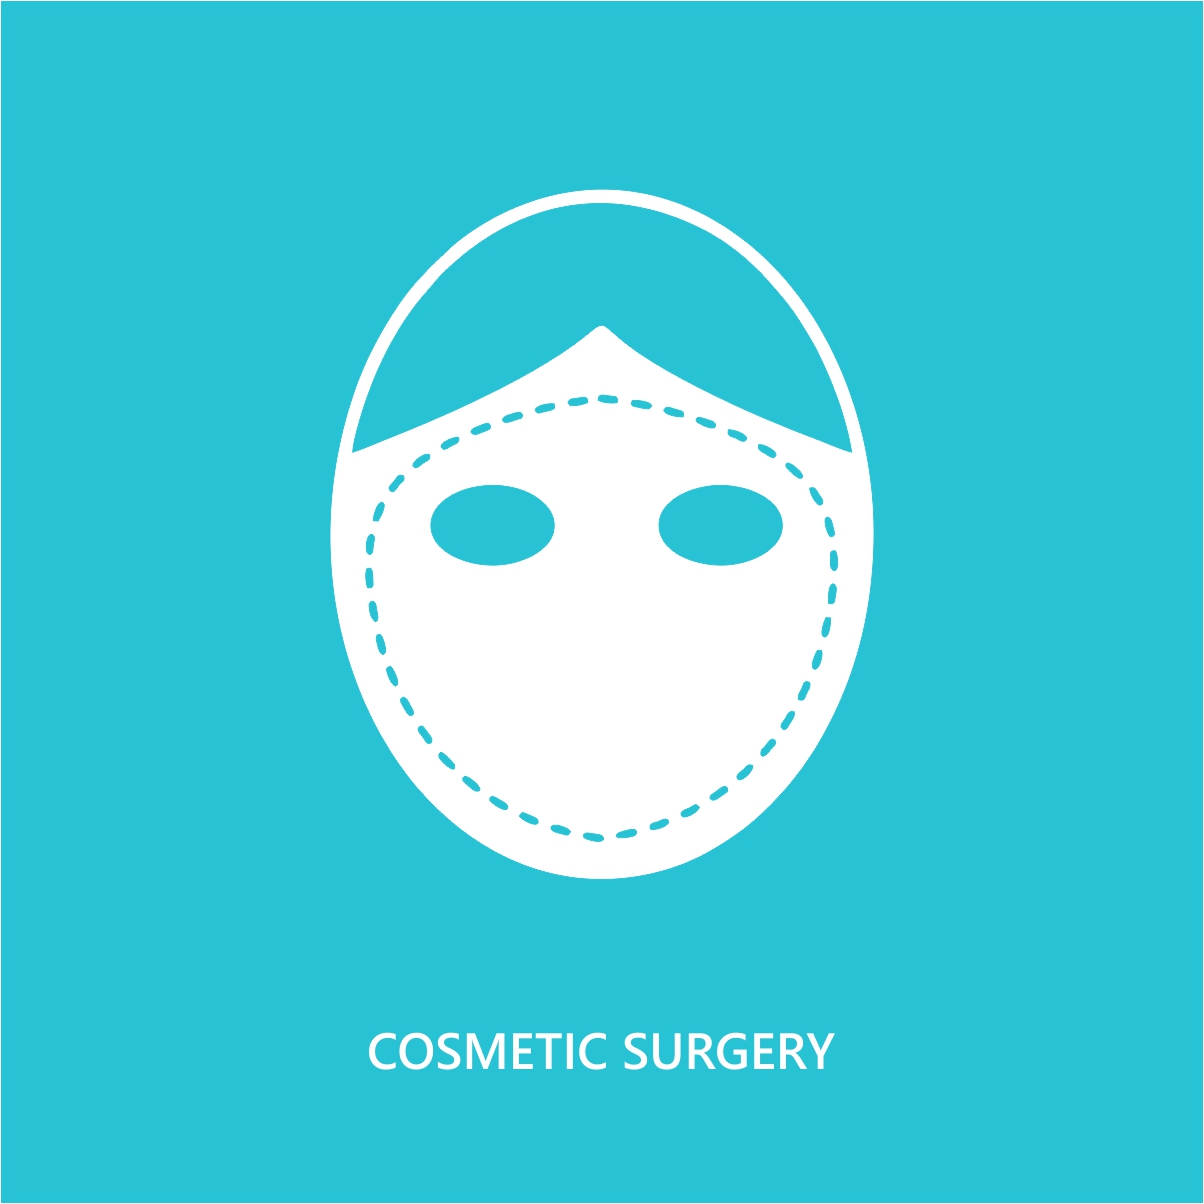 Image of COSMETIC SURGERY